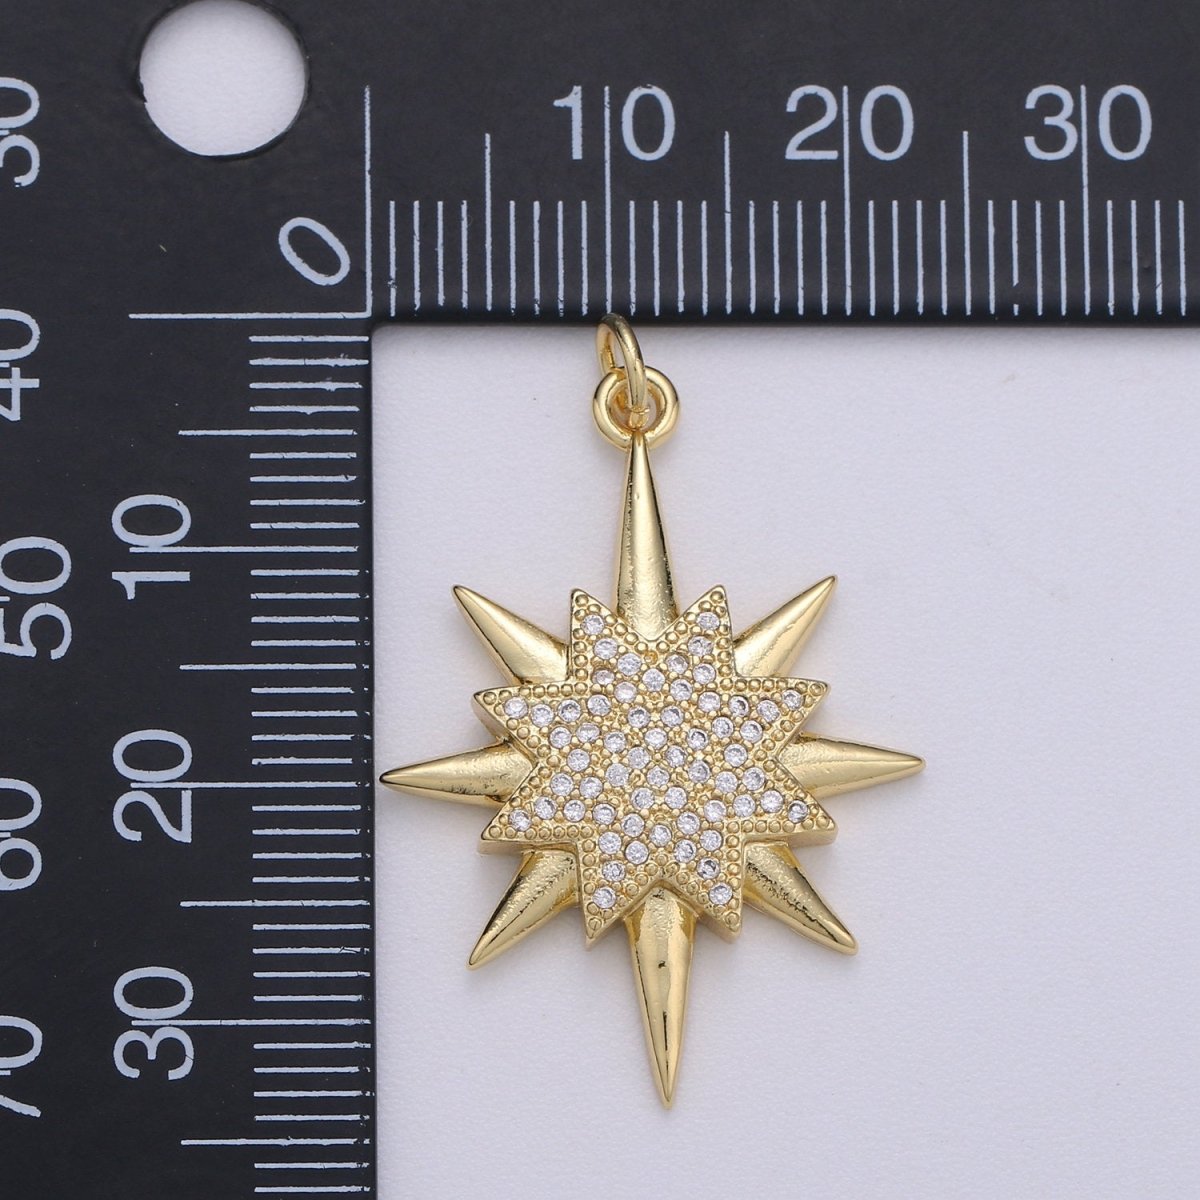 Micro Pave Star Charms, Cubic Zirconia Charms, Gold Star Charm, Necklace Pendant Bracelet Charms Star Celestial Jewelry D-694 - DLUXCA